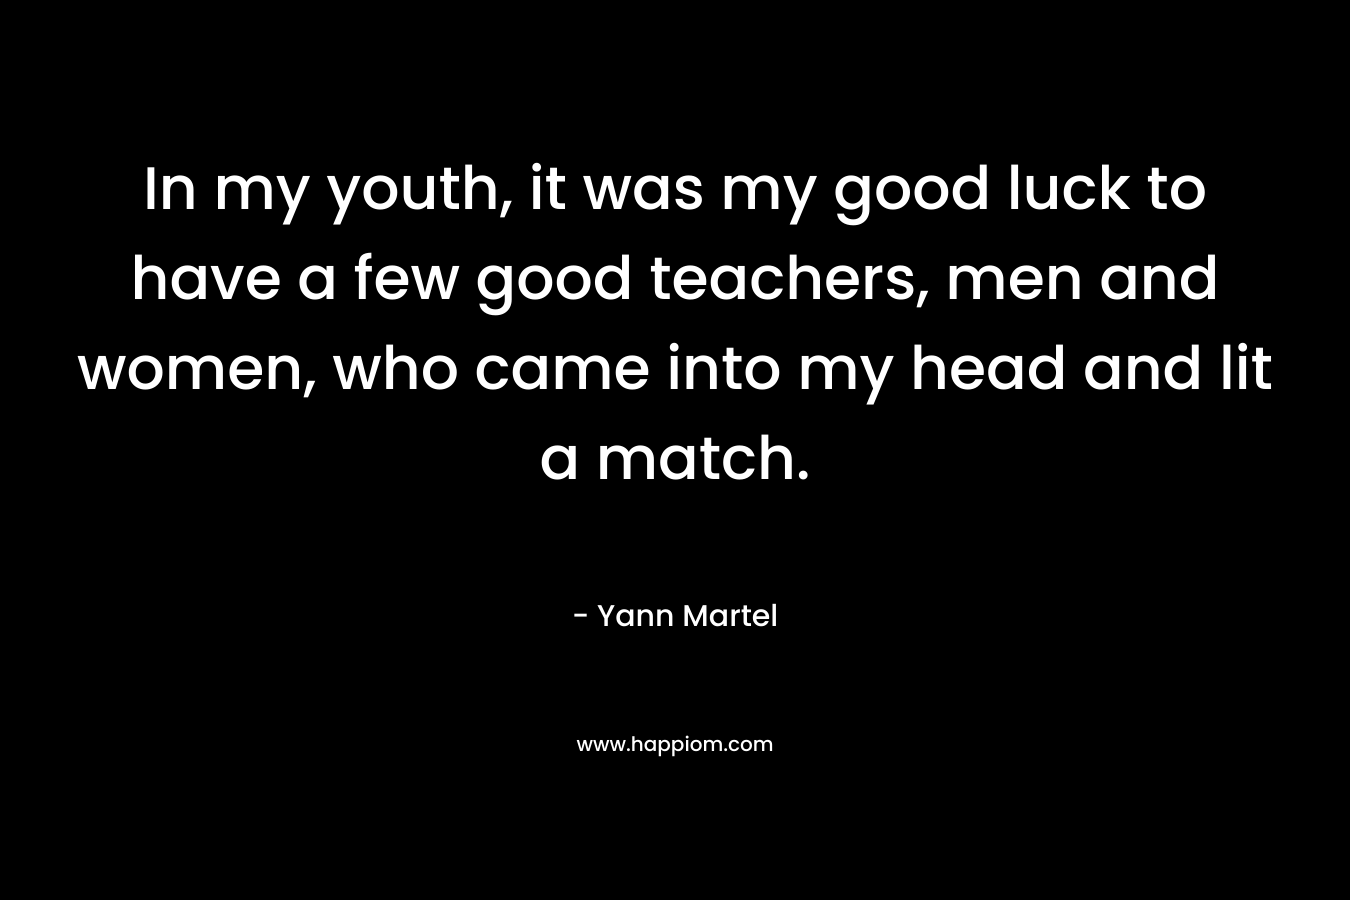 In my youth, it was my good luck to have a few good teachers, men and women, who came into my head and lit a match. – Yann Martel